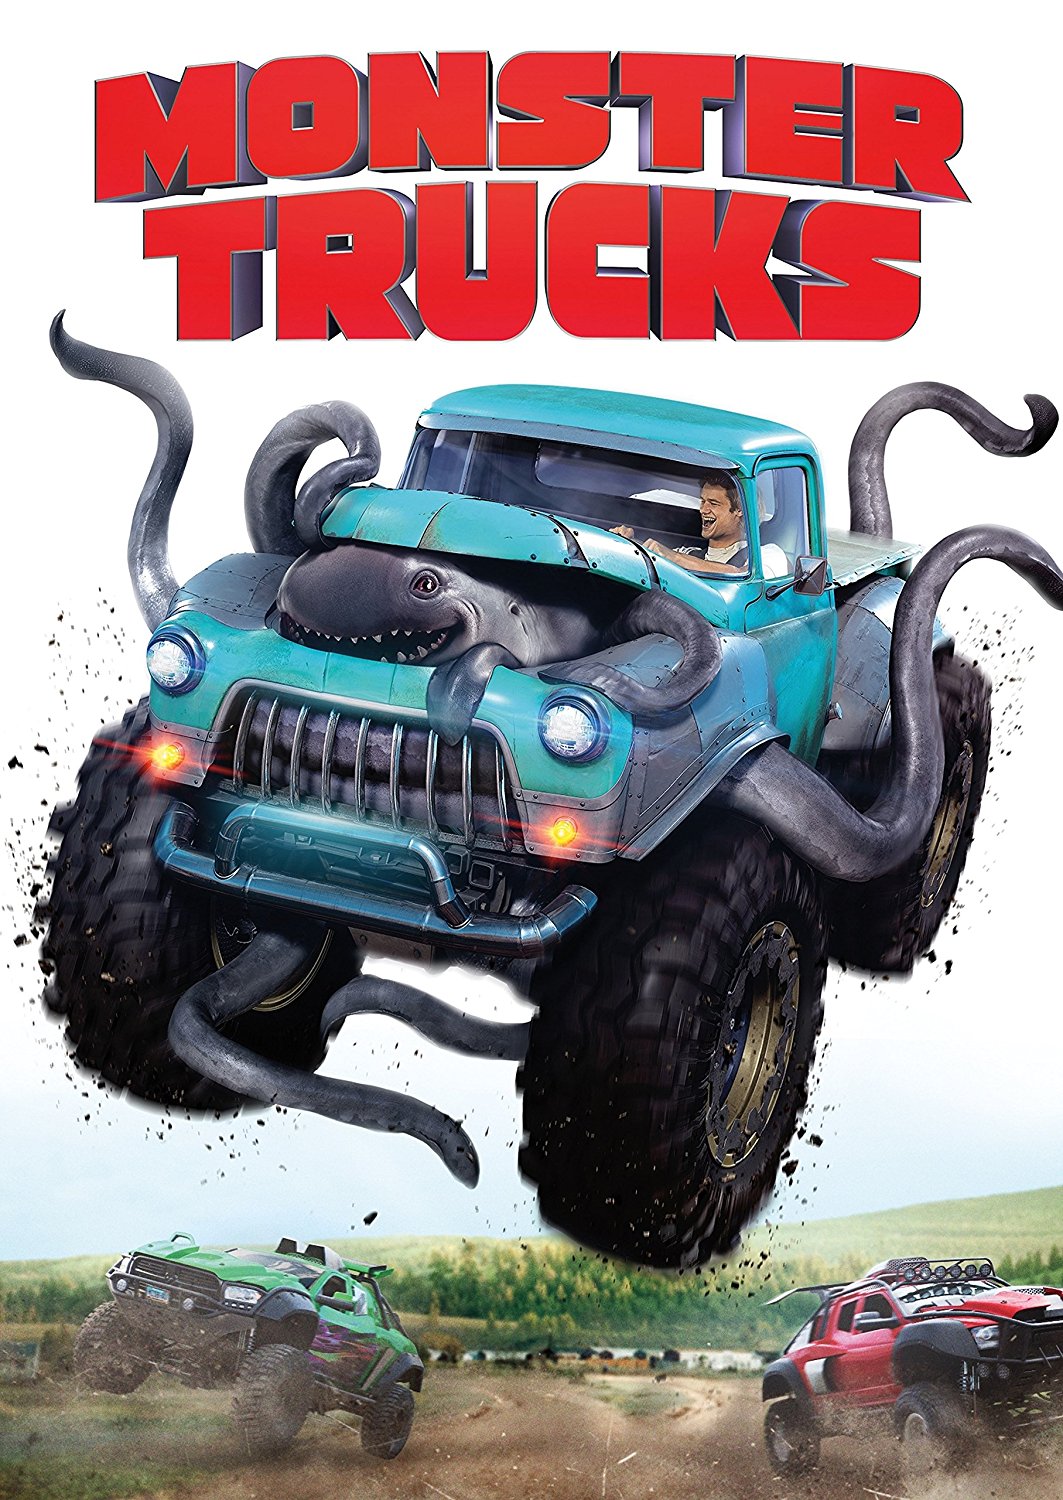 Monster Trucks an 80s-Style Creature-Action Film That's Family Friendly |  Critical Blast